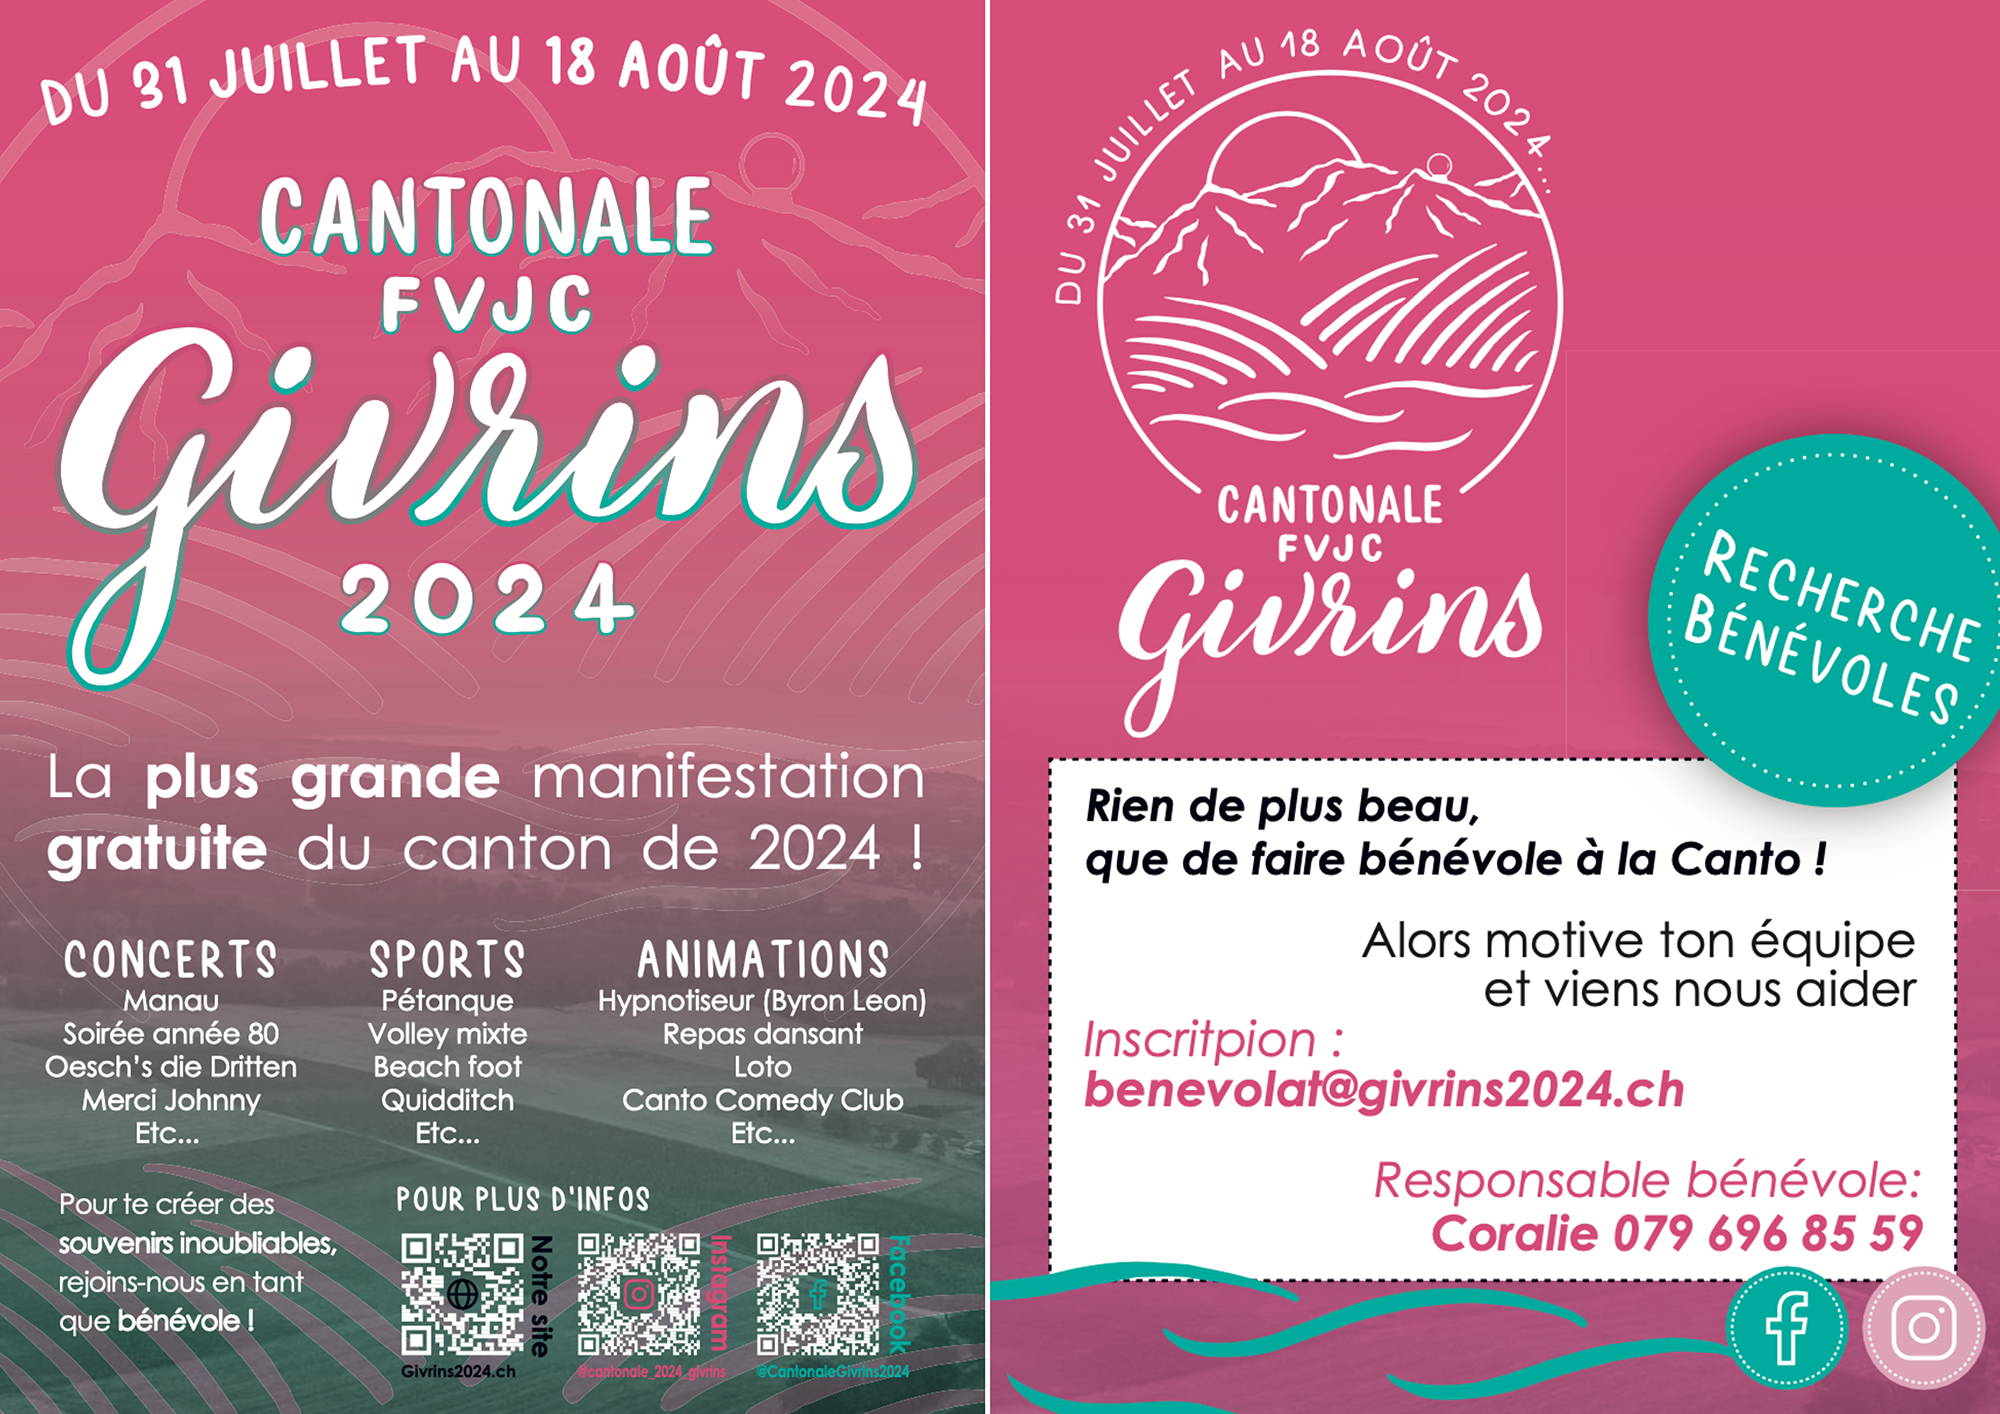 Cantonale Givrins2024 flyer